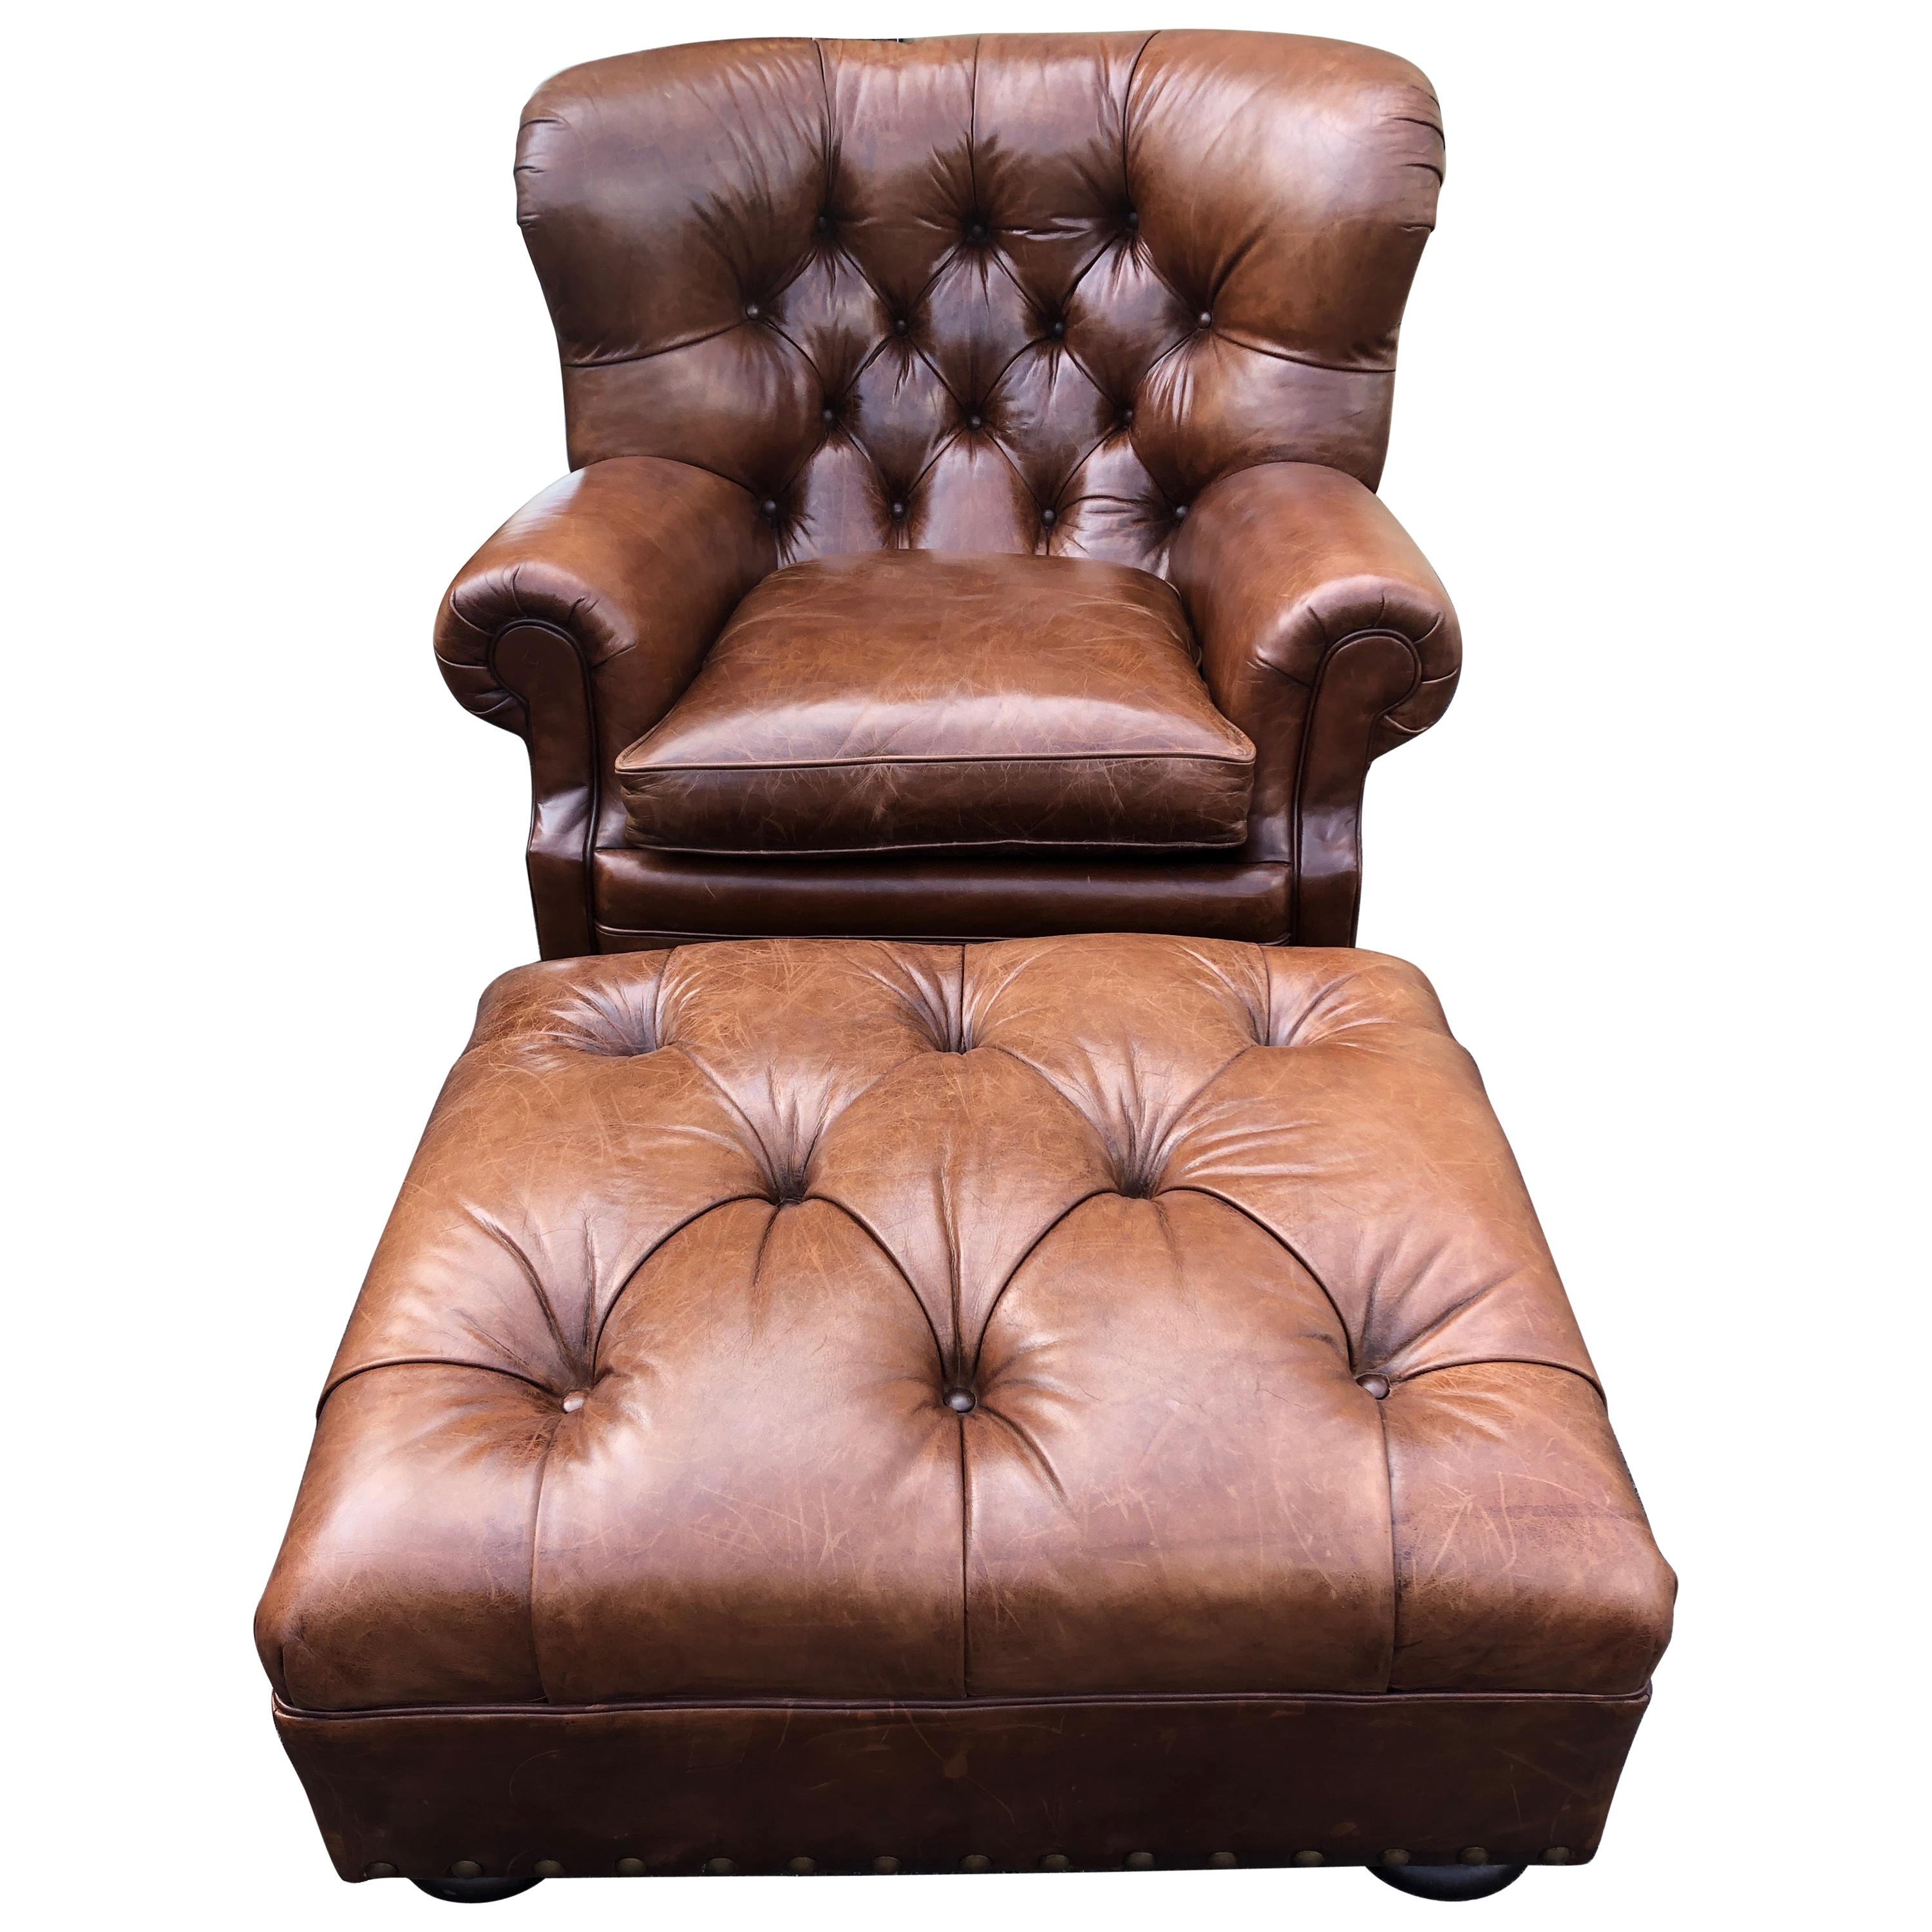 Super Luxe Ralph Lauren Tufted Leather, Rustic Leather Chair And Ottoman